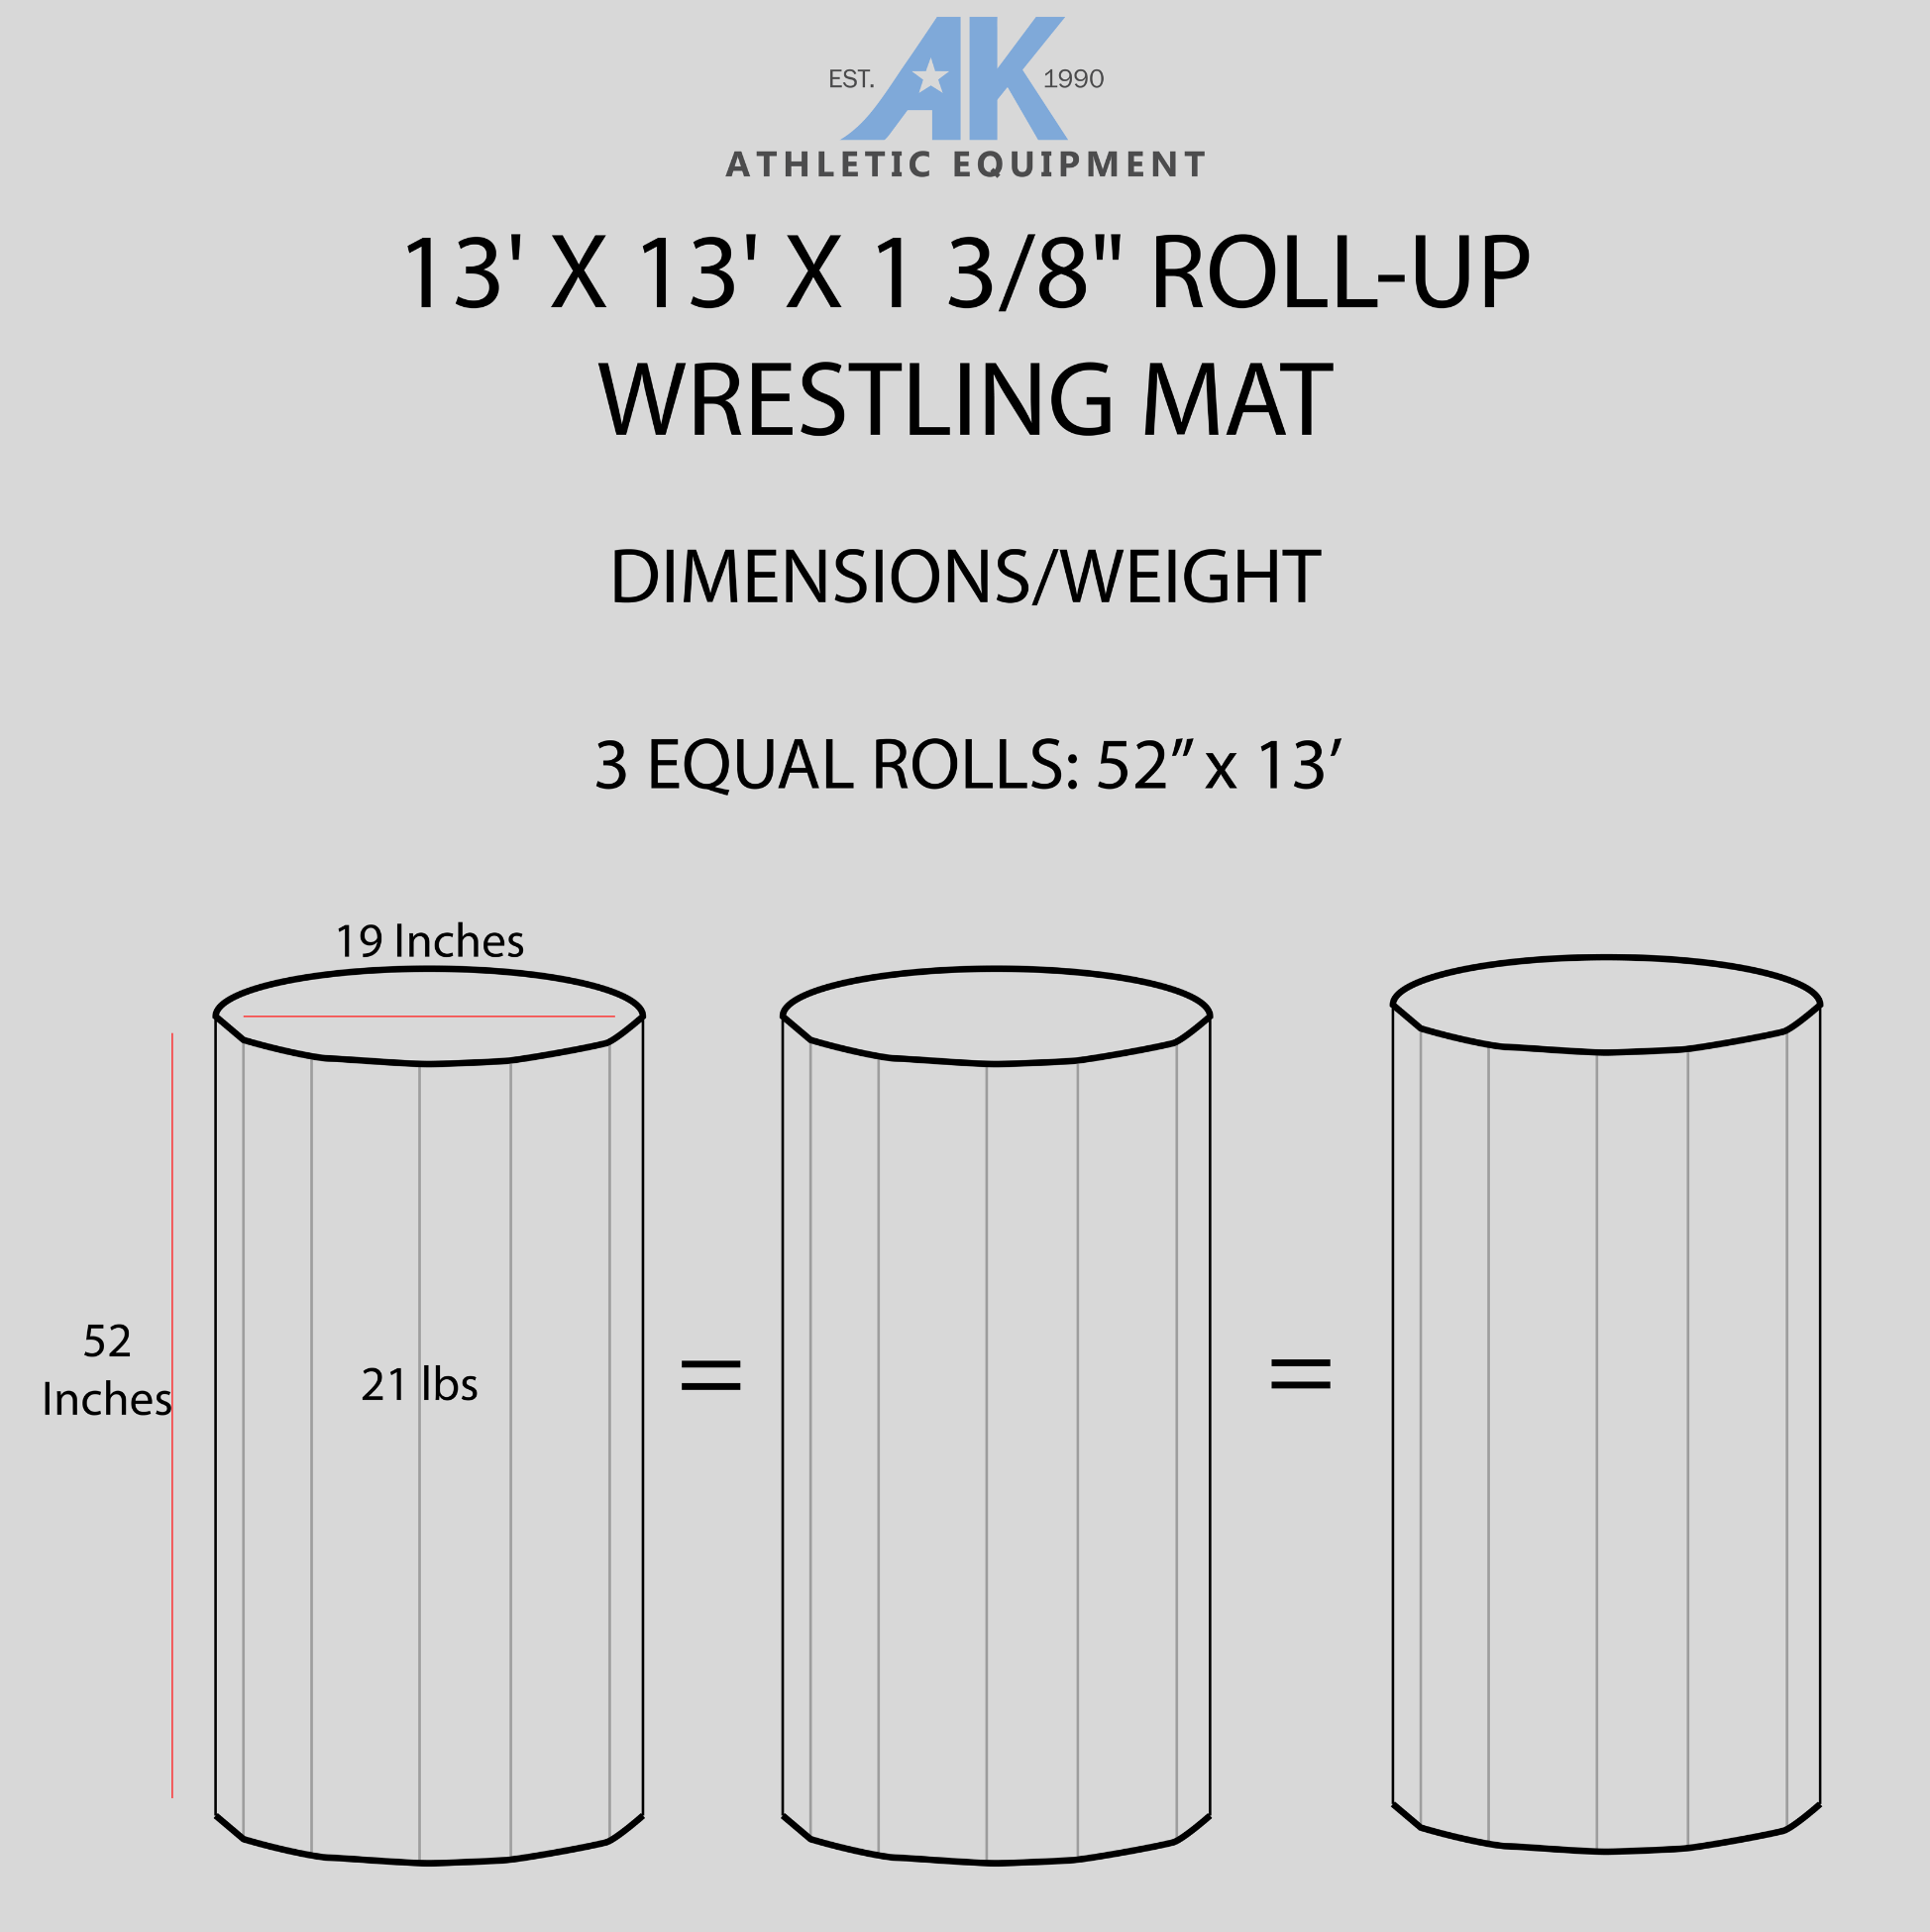 Wrestling mat section sizes for easy to store easy to transport use. AK Athletics handmade in the USA. Industry leading wrestling mat products. 